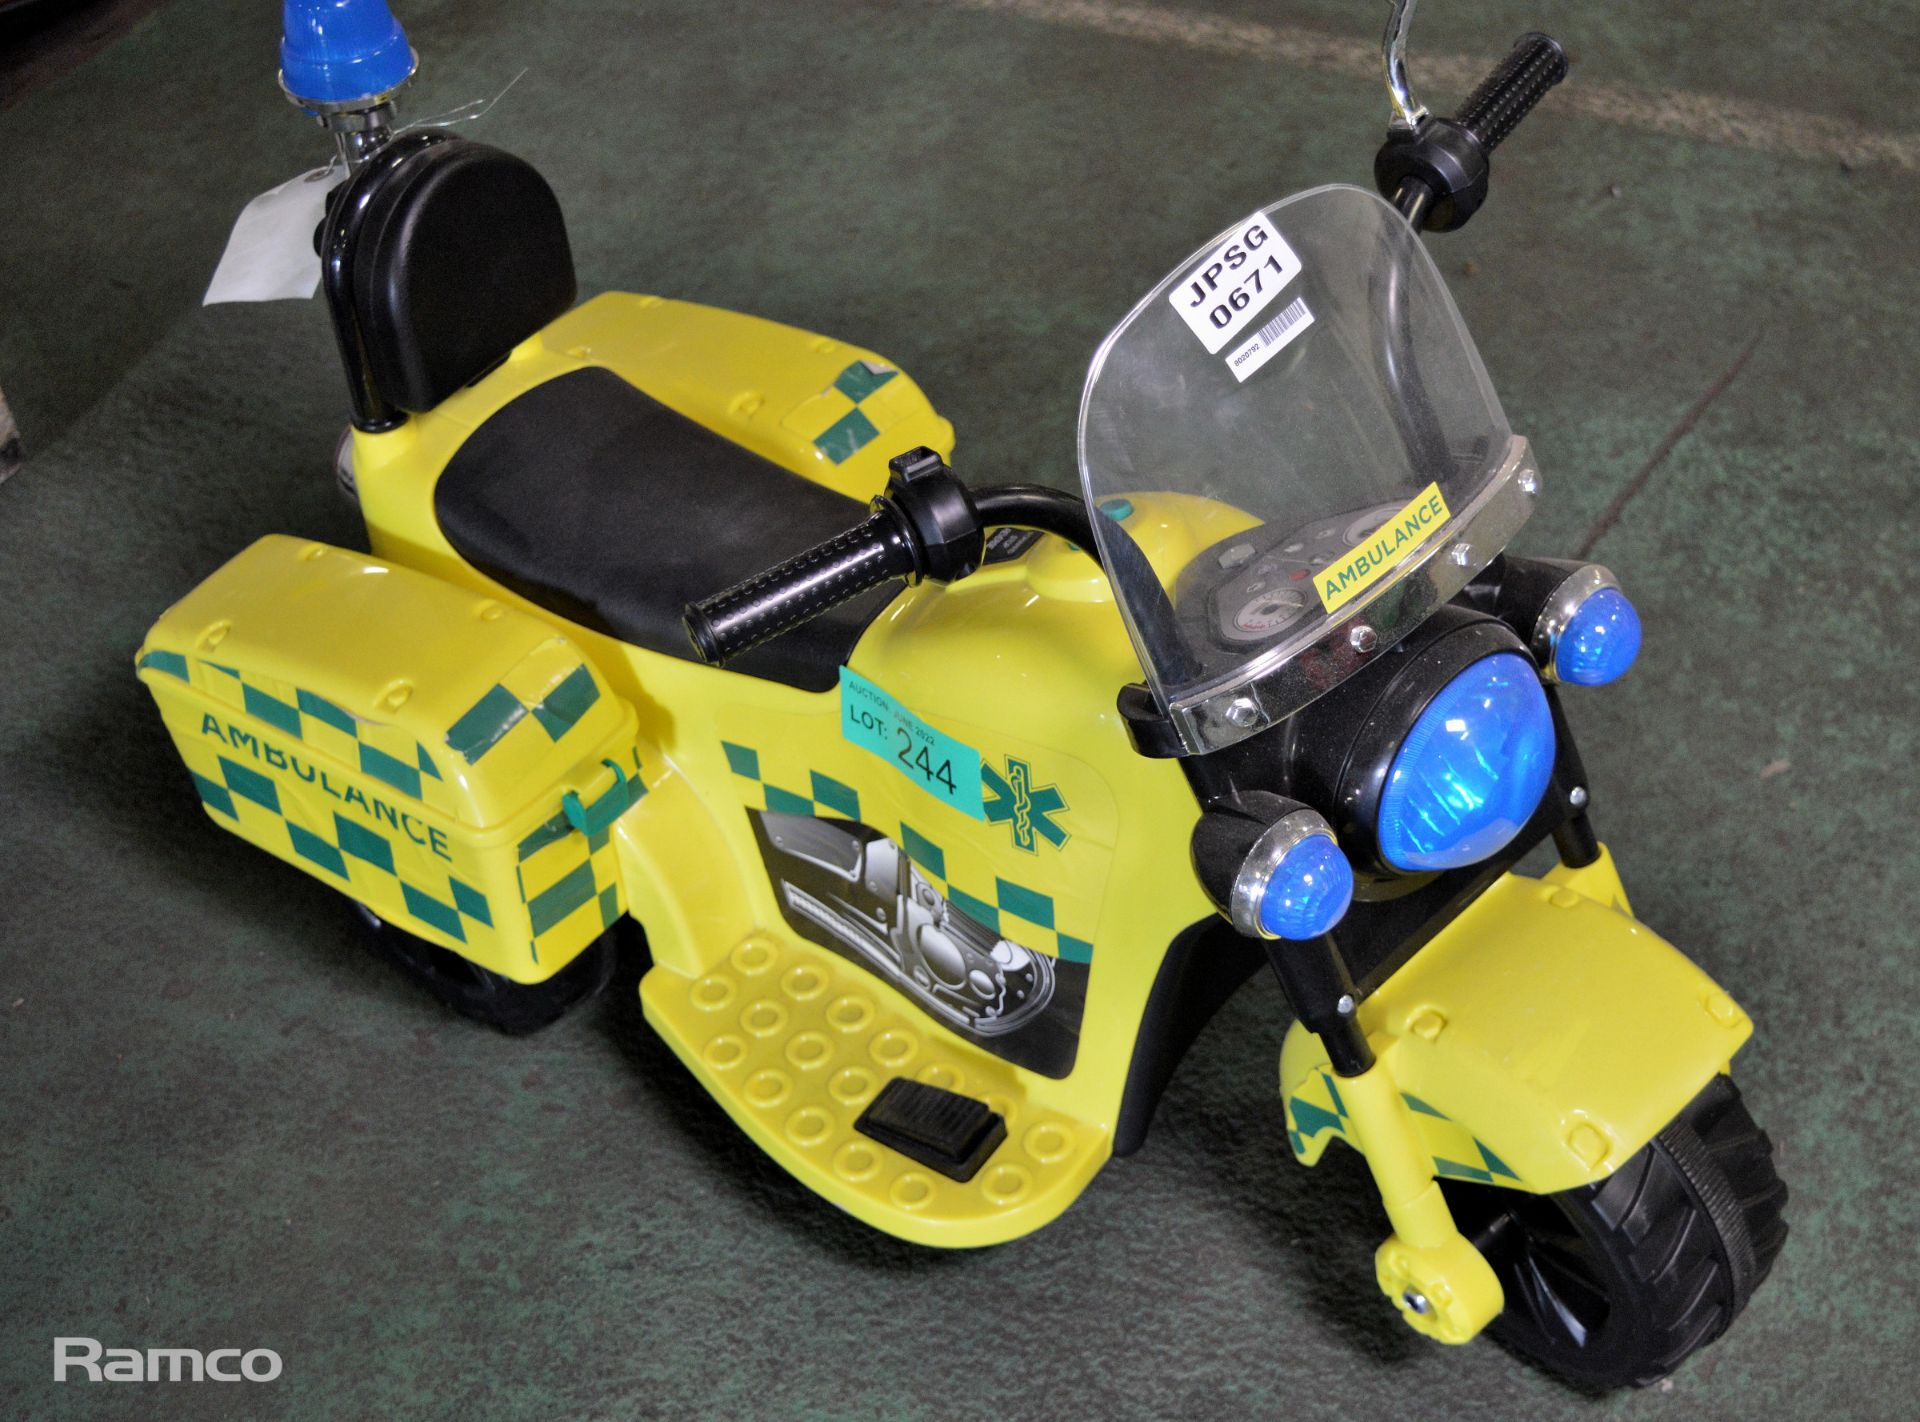 Small plastic Ambulance battery operated ride on motorcycle - Image 2 of 4